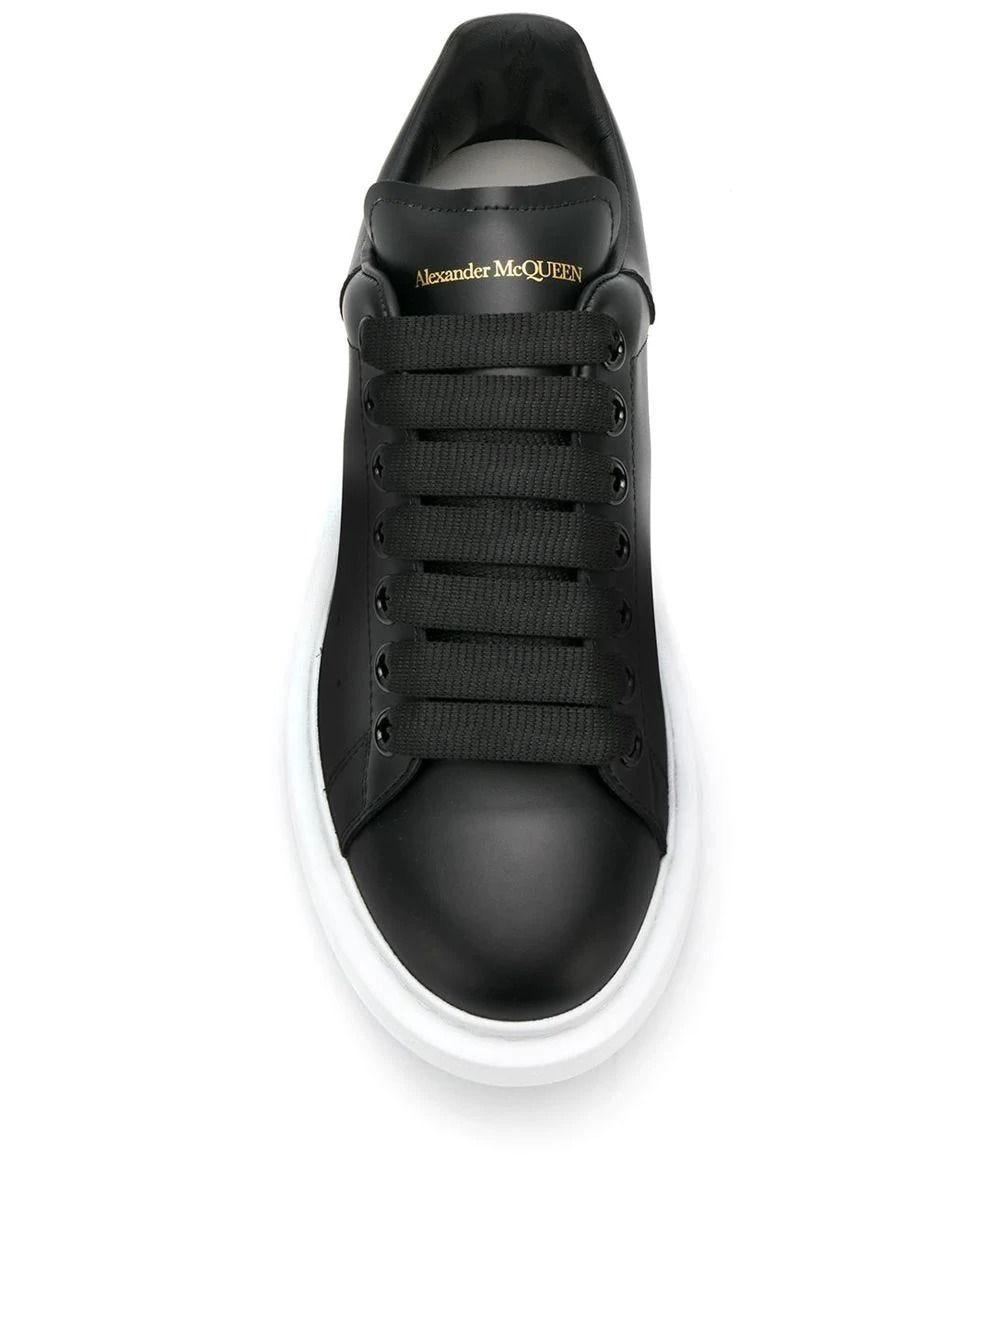 alexander mcqueen black velvet sneakers - Online Discount Shop for  Electronics, Apparel, Toys, Books, Games, Computers, Shoes, Jewelry,  Watches, Baby Products, Sports & Outdoors, Office Products, Bed & Bath,  Furniture, Tools, Hardware,